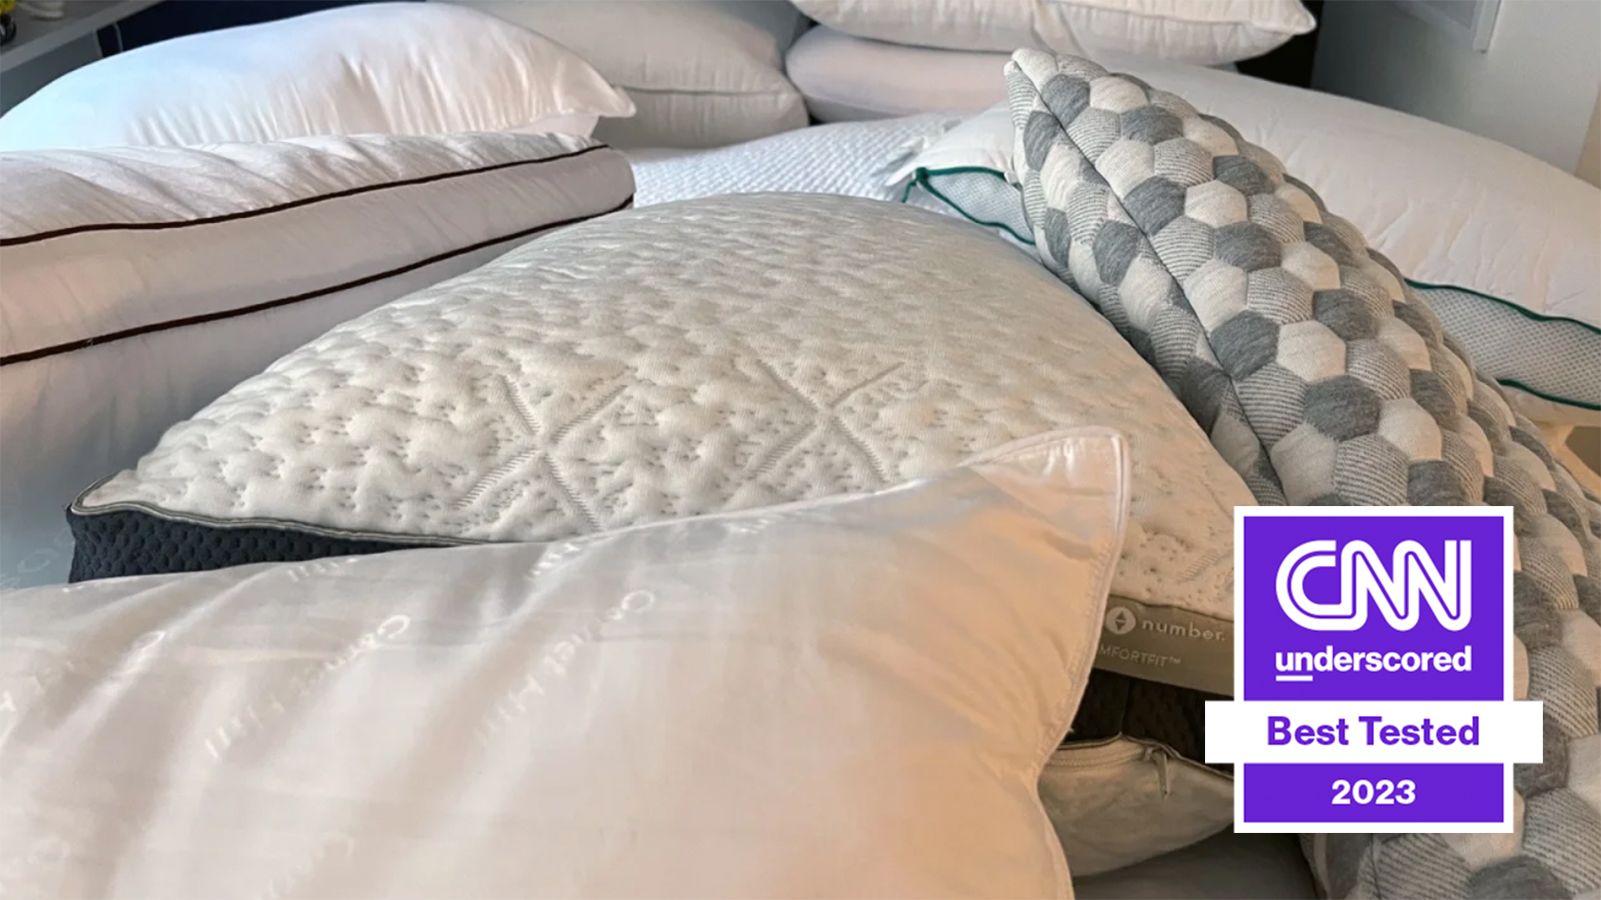 The 9 Best Pillows for Side Sleepers of 2022, Ranked